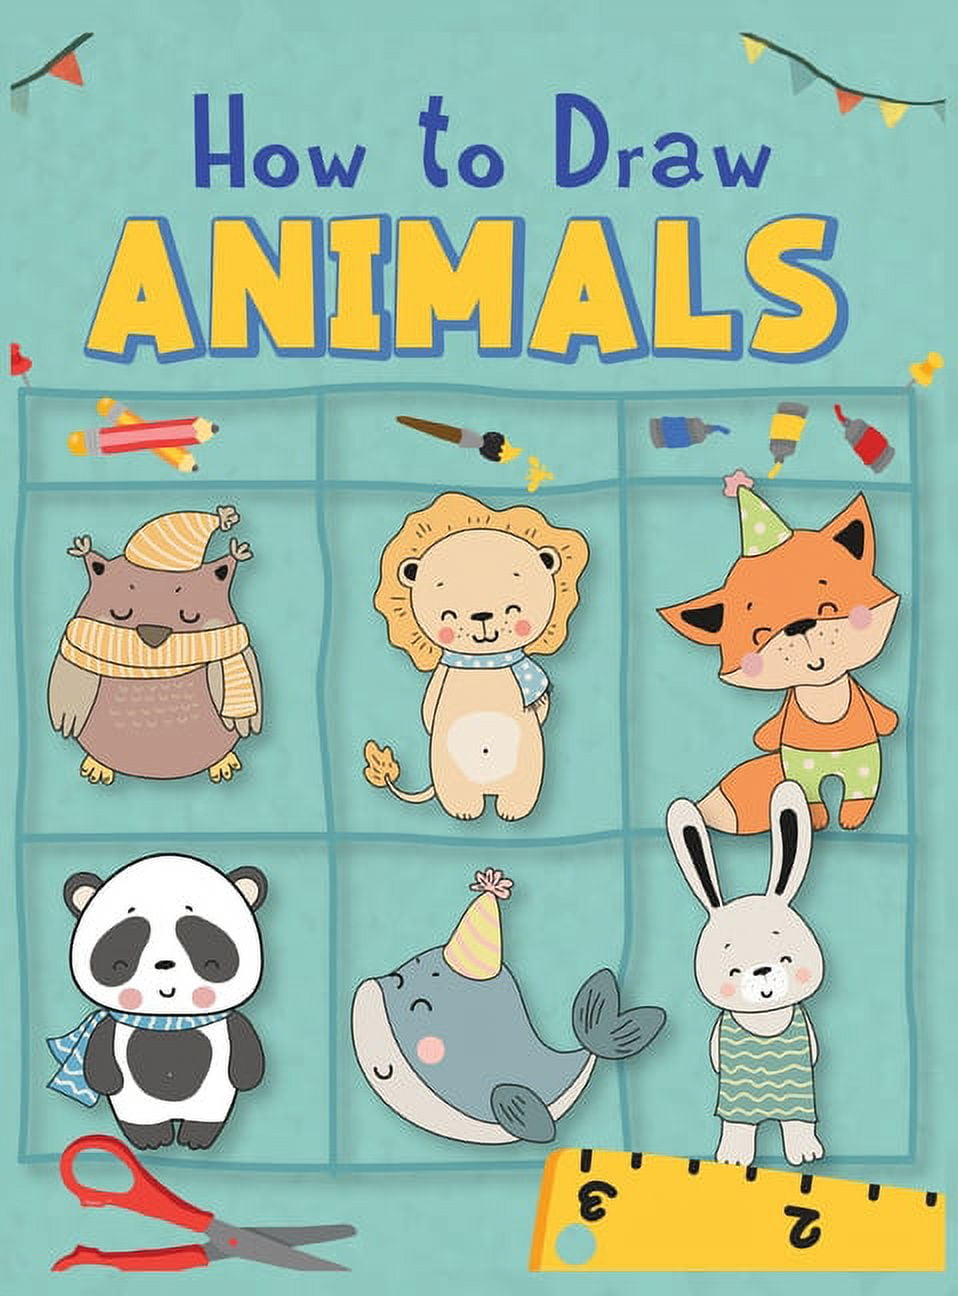 How to Draw for Kids. More Than 100 Pages of How to Draw Animals with Step-by-Step Instructions. Creative Exercises for Little Hands with Big Imaginations (Drawing Books Age 8-12) [Book]